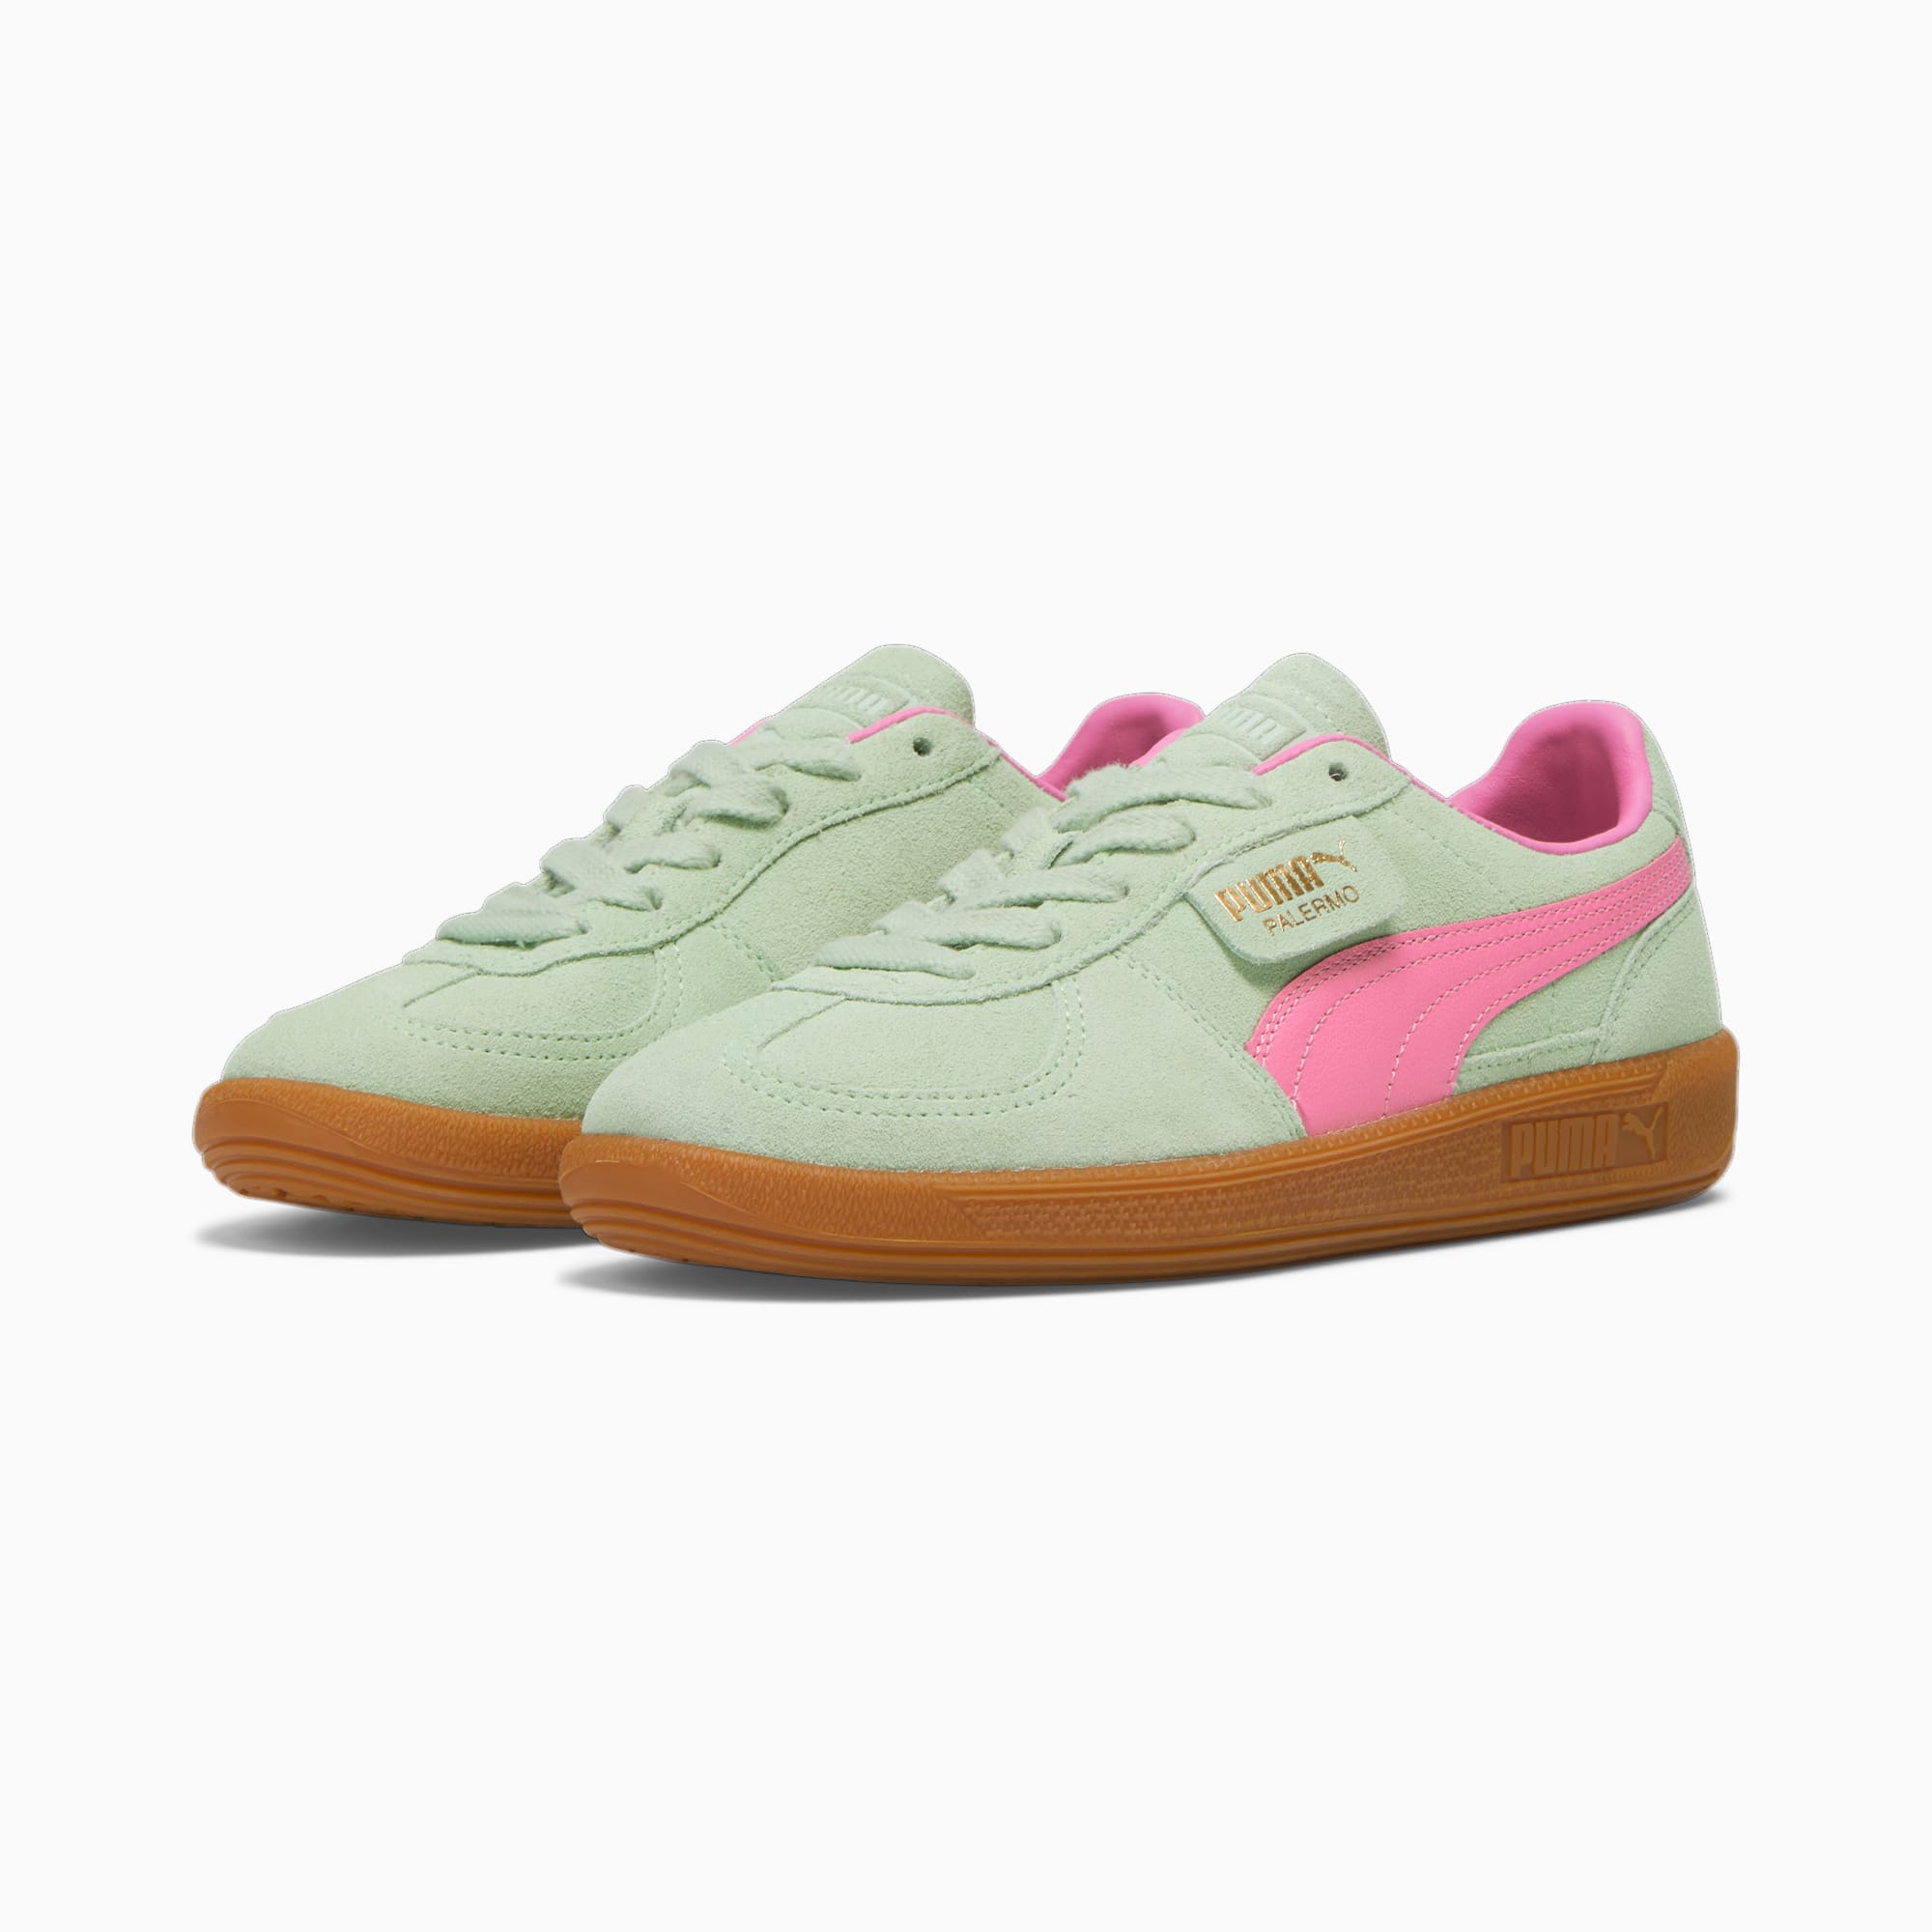 Women's Puma Palermo Leather Casual Shoes